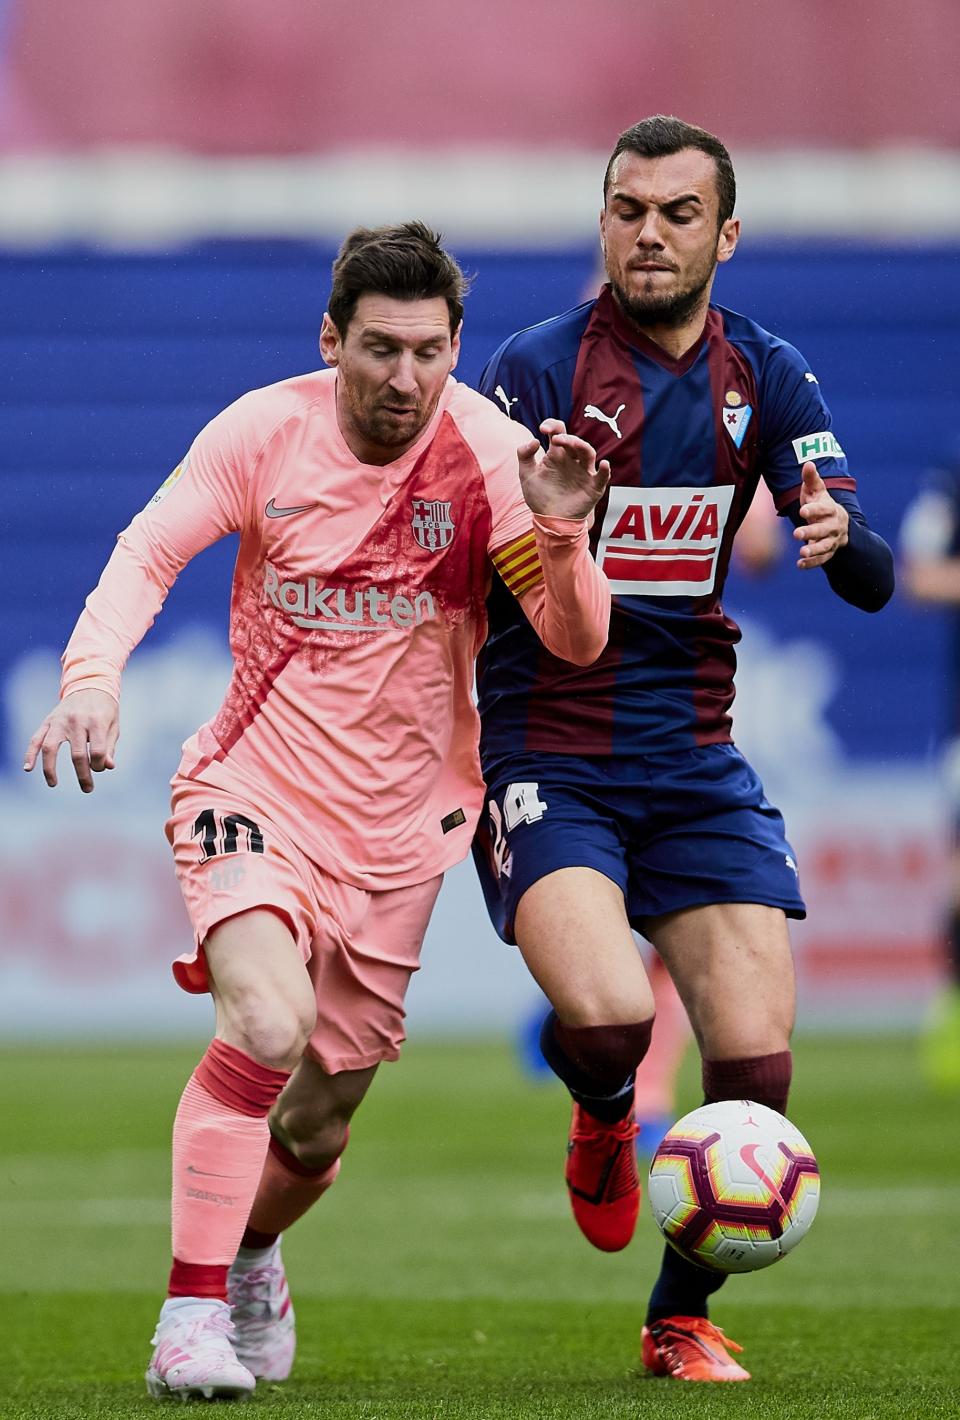 Barcelona's Lionel Messi, left, duels for the ball against Eibar's Joan Jordan during a Spanish La Liga soccer match at the Ipurua stadium, in Eibar, northern Spain, Sunday, May 19, 2019. (AP Photo/Ion Alcoba)